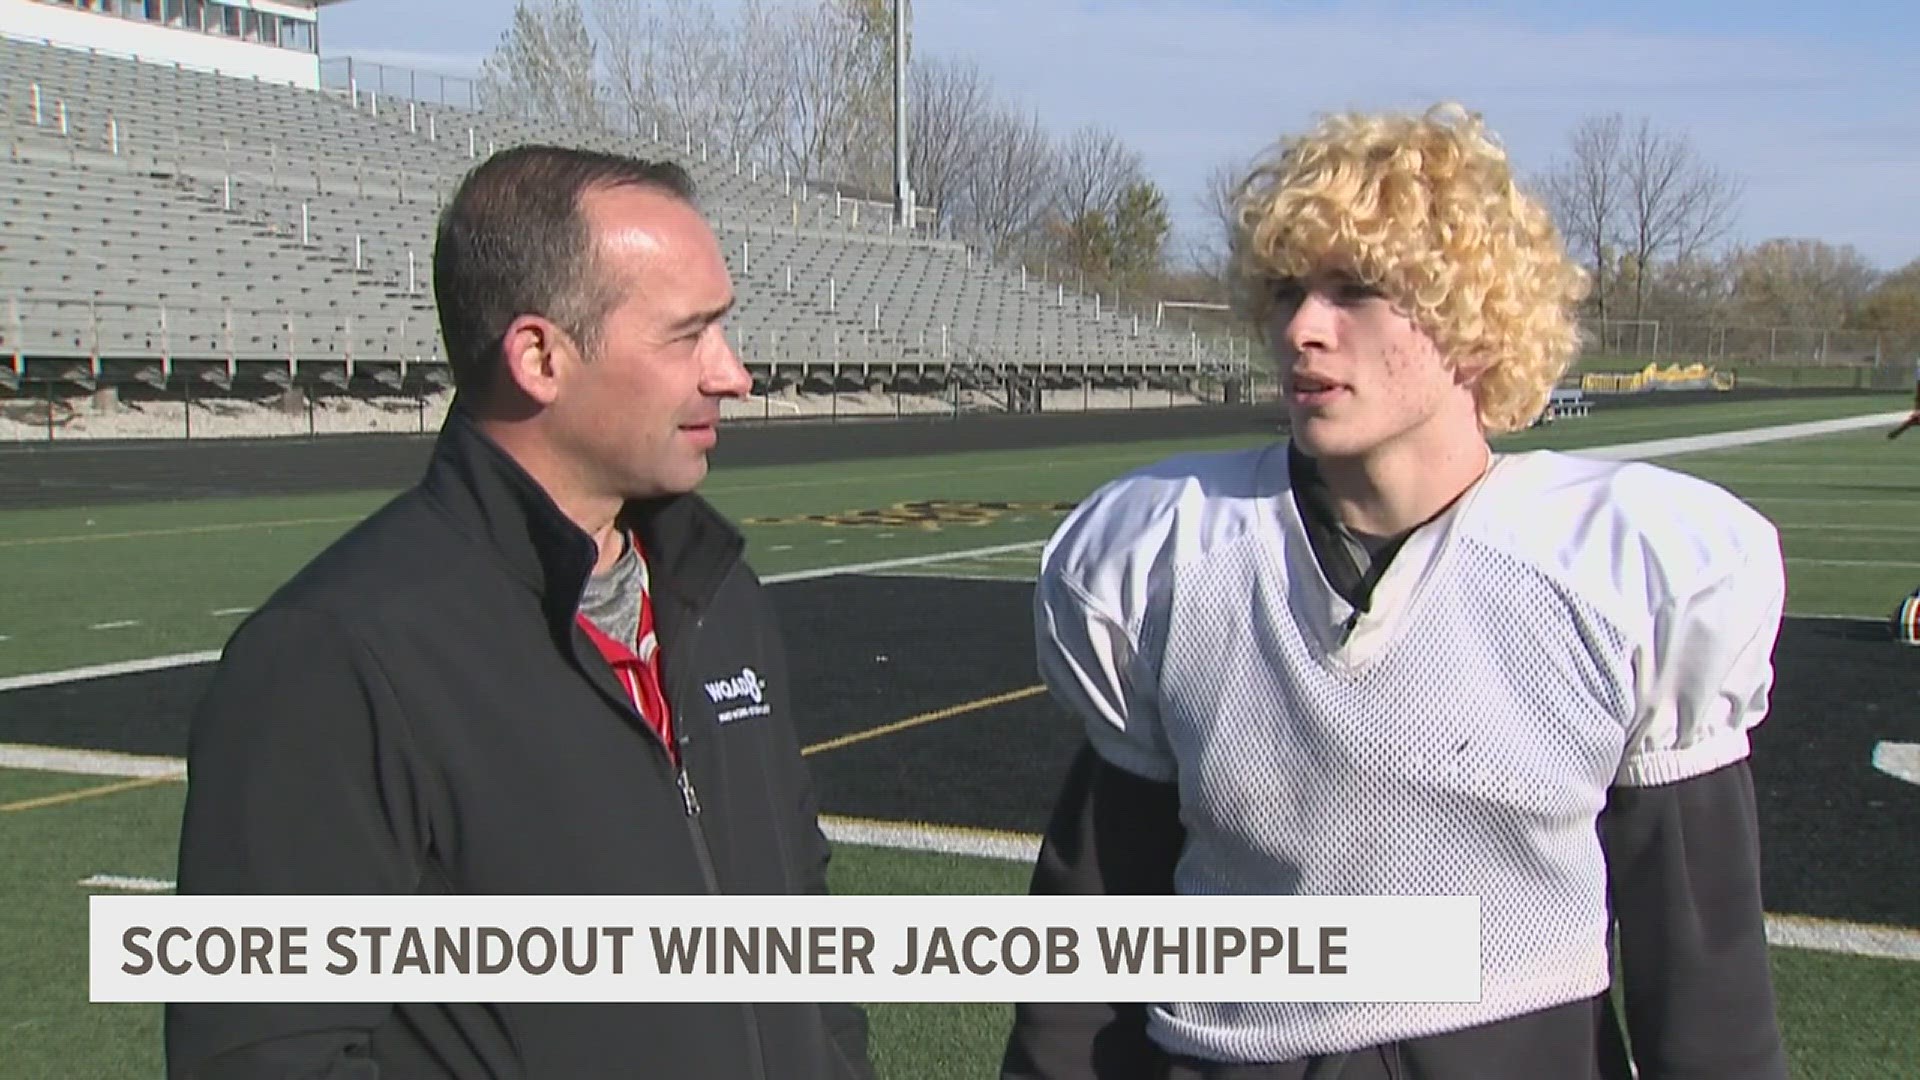 Whipple had 118 rushing yards and 2 touchdowns in Bettendorf's playoff matchup against Iowa City.